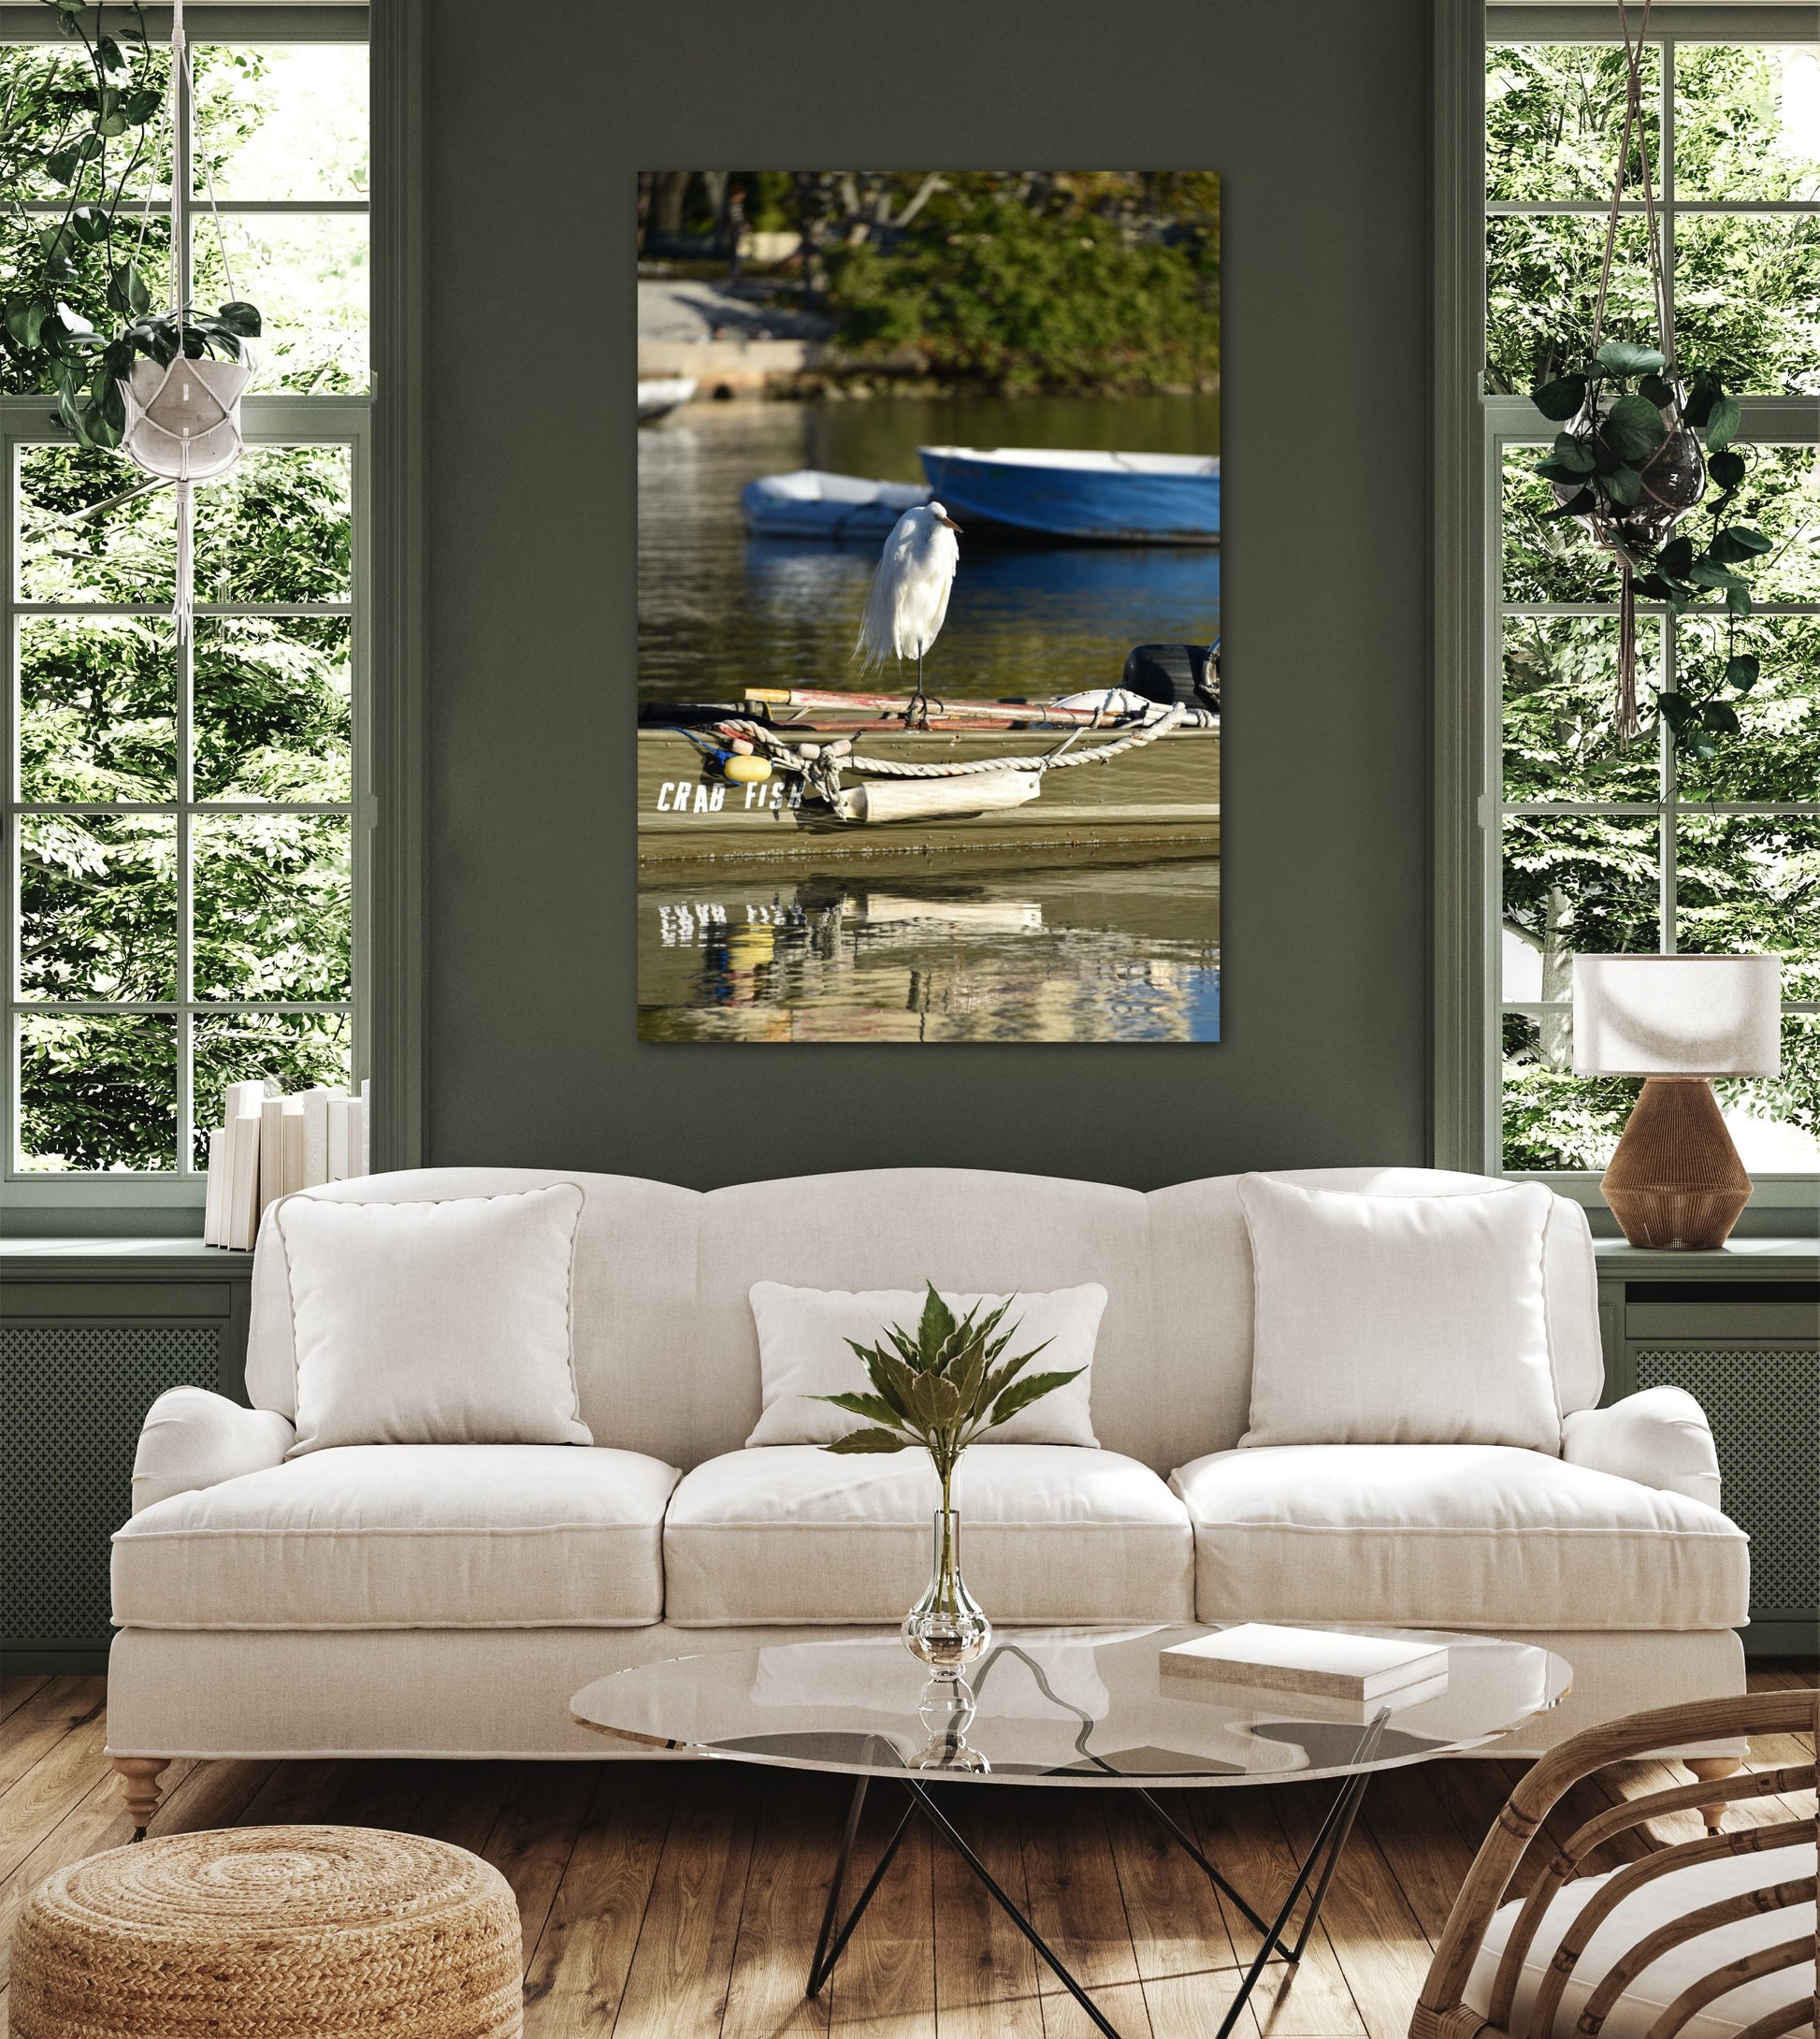 Nature bird on the water and boat photography canvas print on living room wall